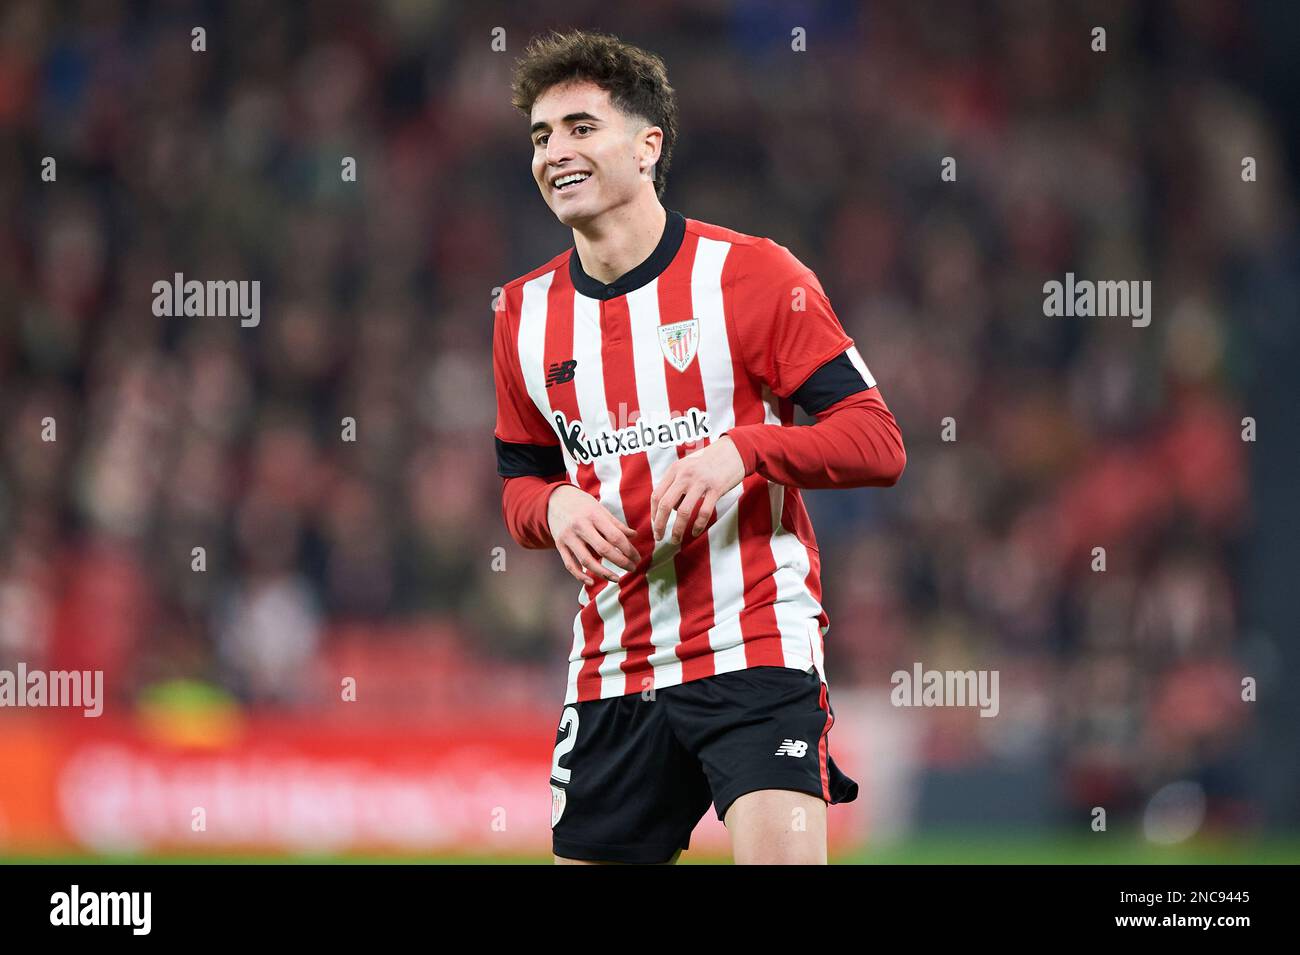 Jon Morcillo of Athletic Club during the La Liga match between Athletic Club and Cadiz CF played at San Mames Stadium on February 3, 2023 in Bilbao, Spain. (Photo by Cesar Ortiz / PRESSIN) Stock Photo